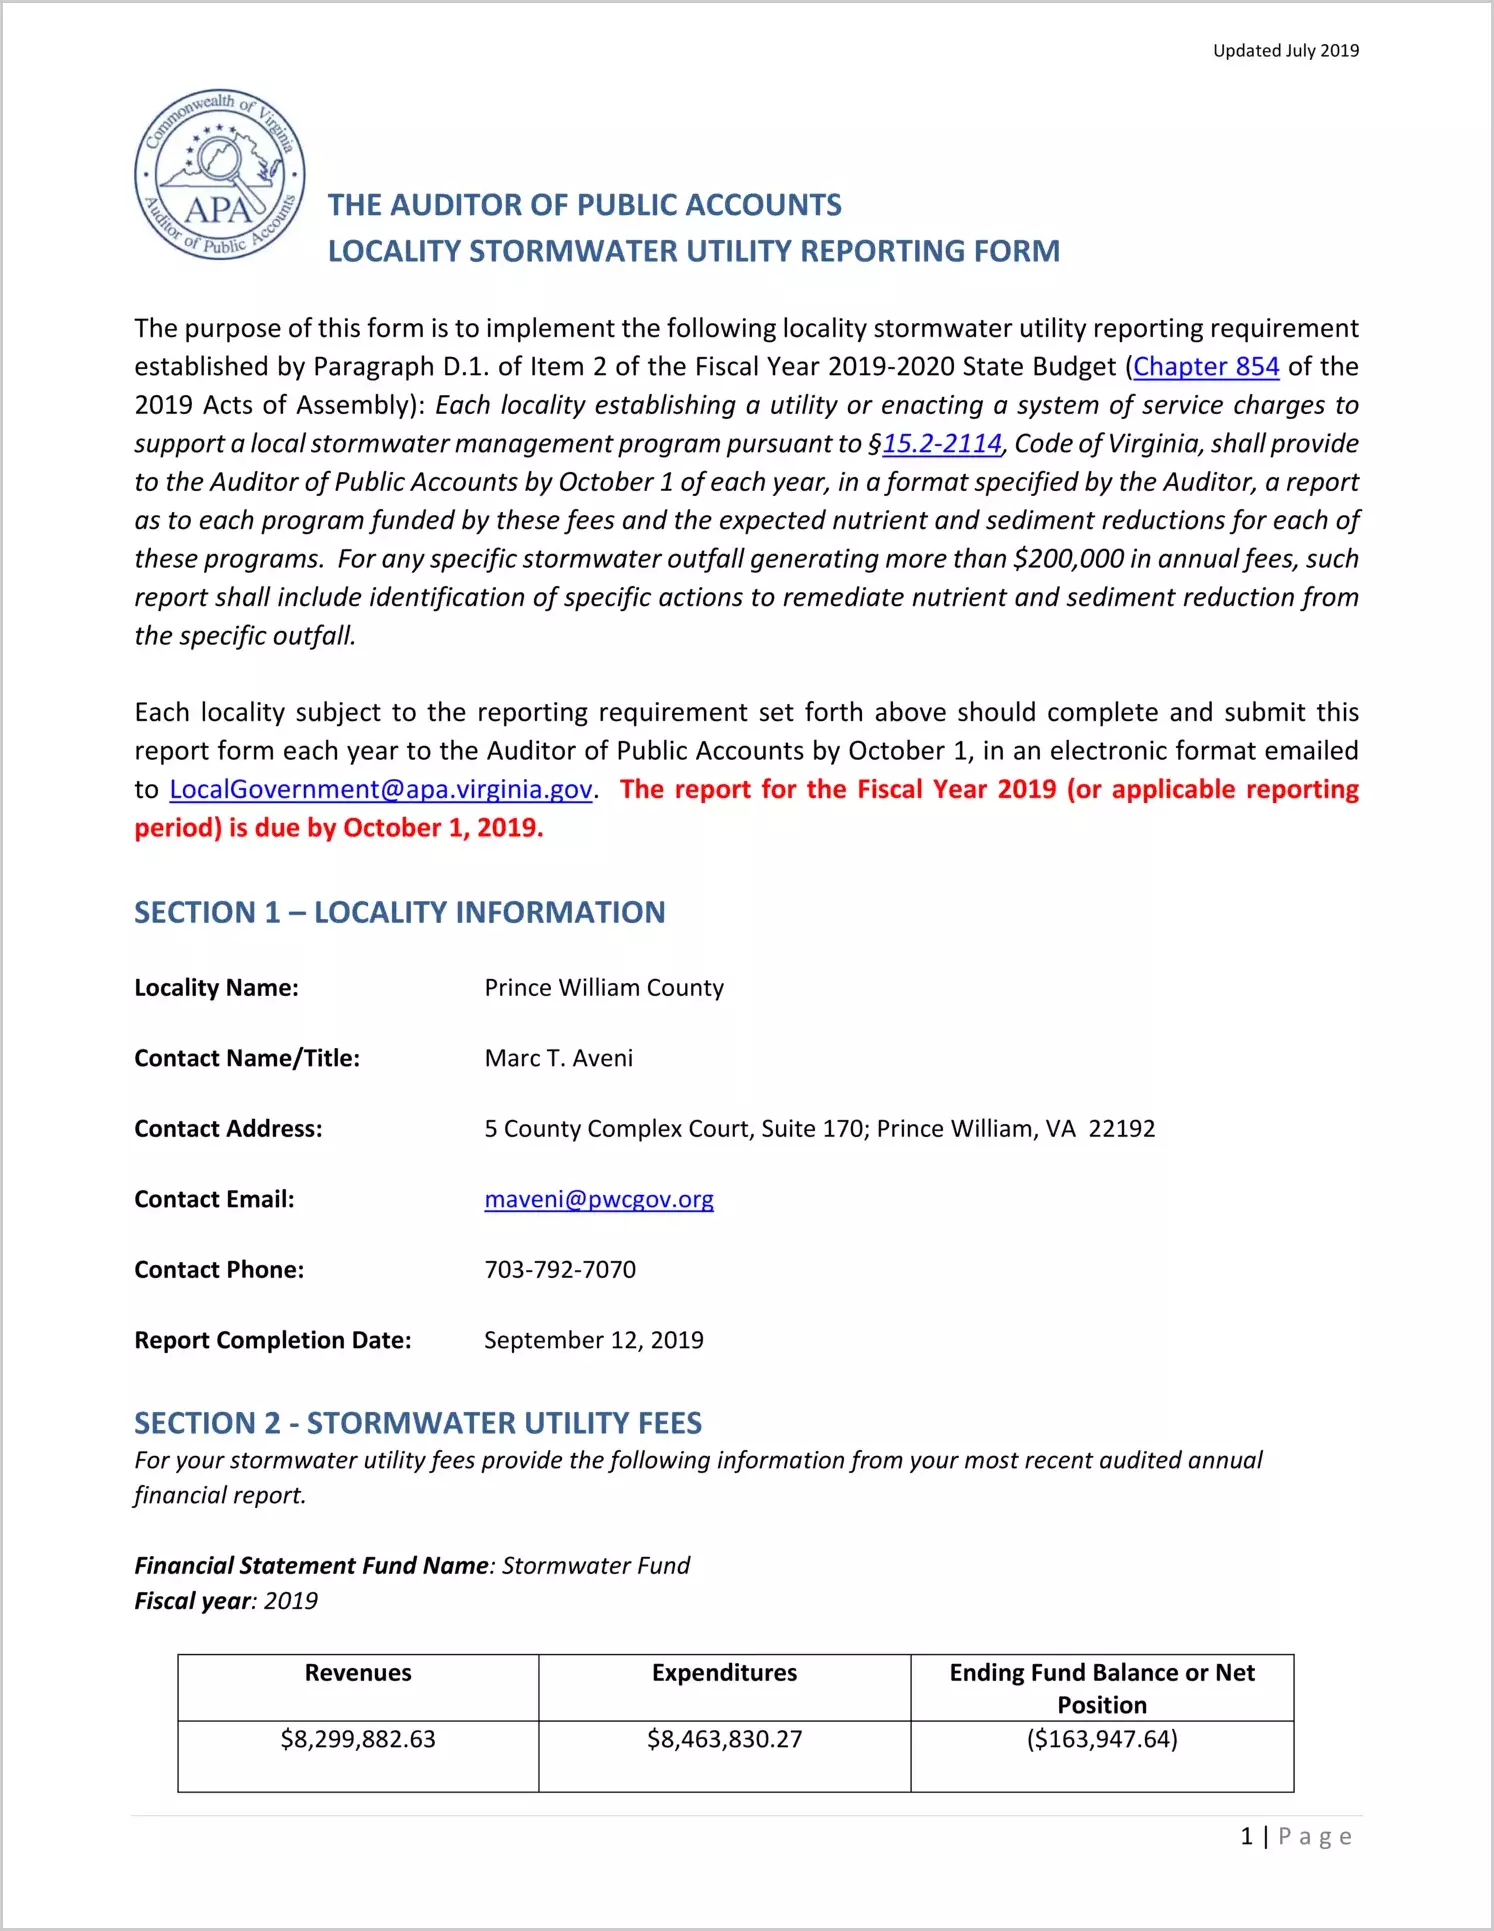 2019 Stormwater Utility Report for County of Prince William